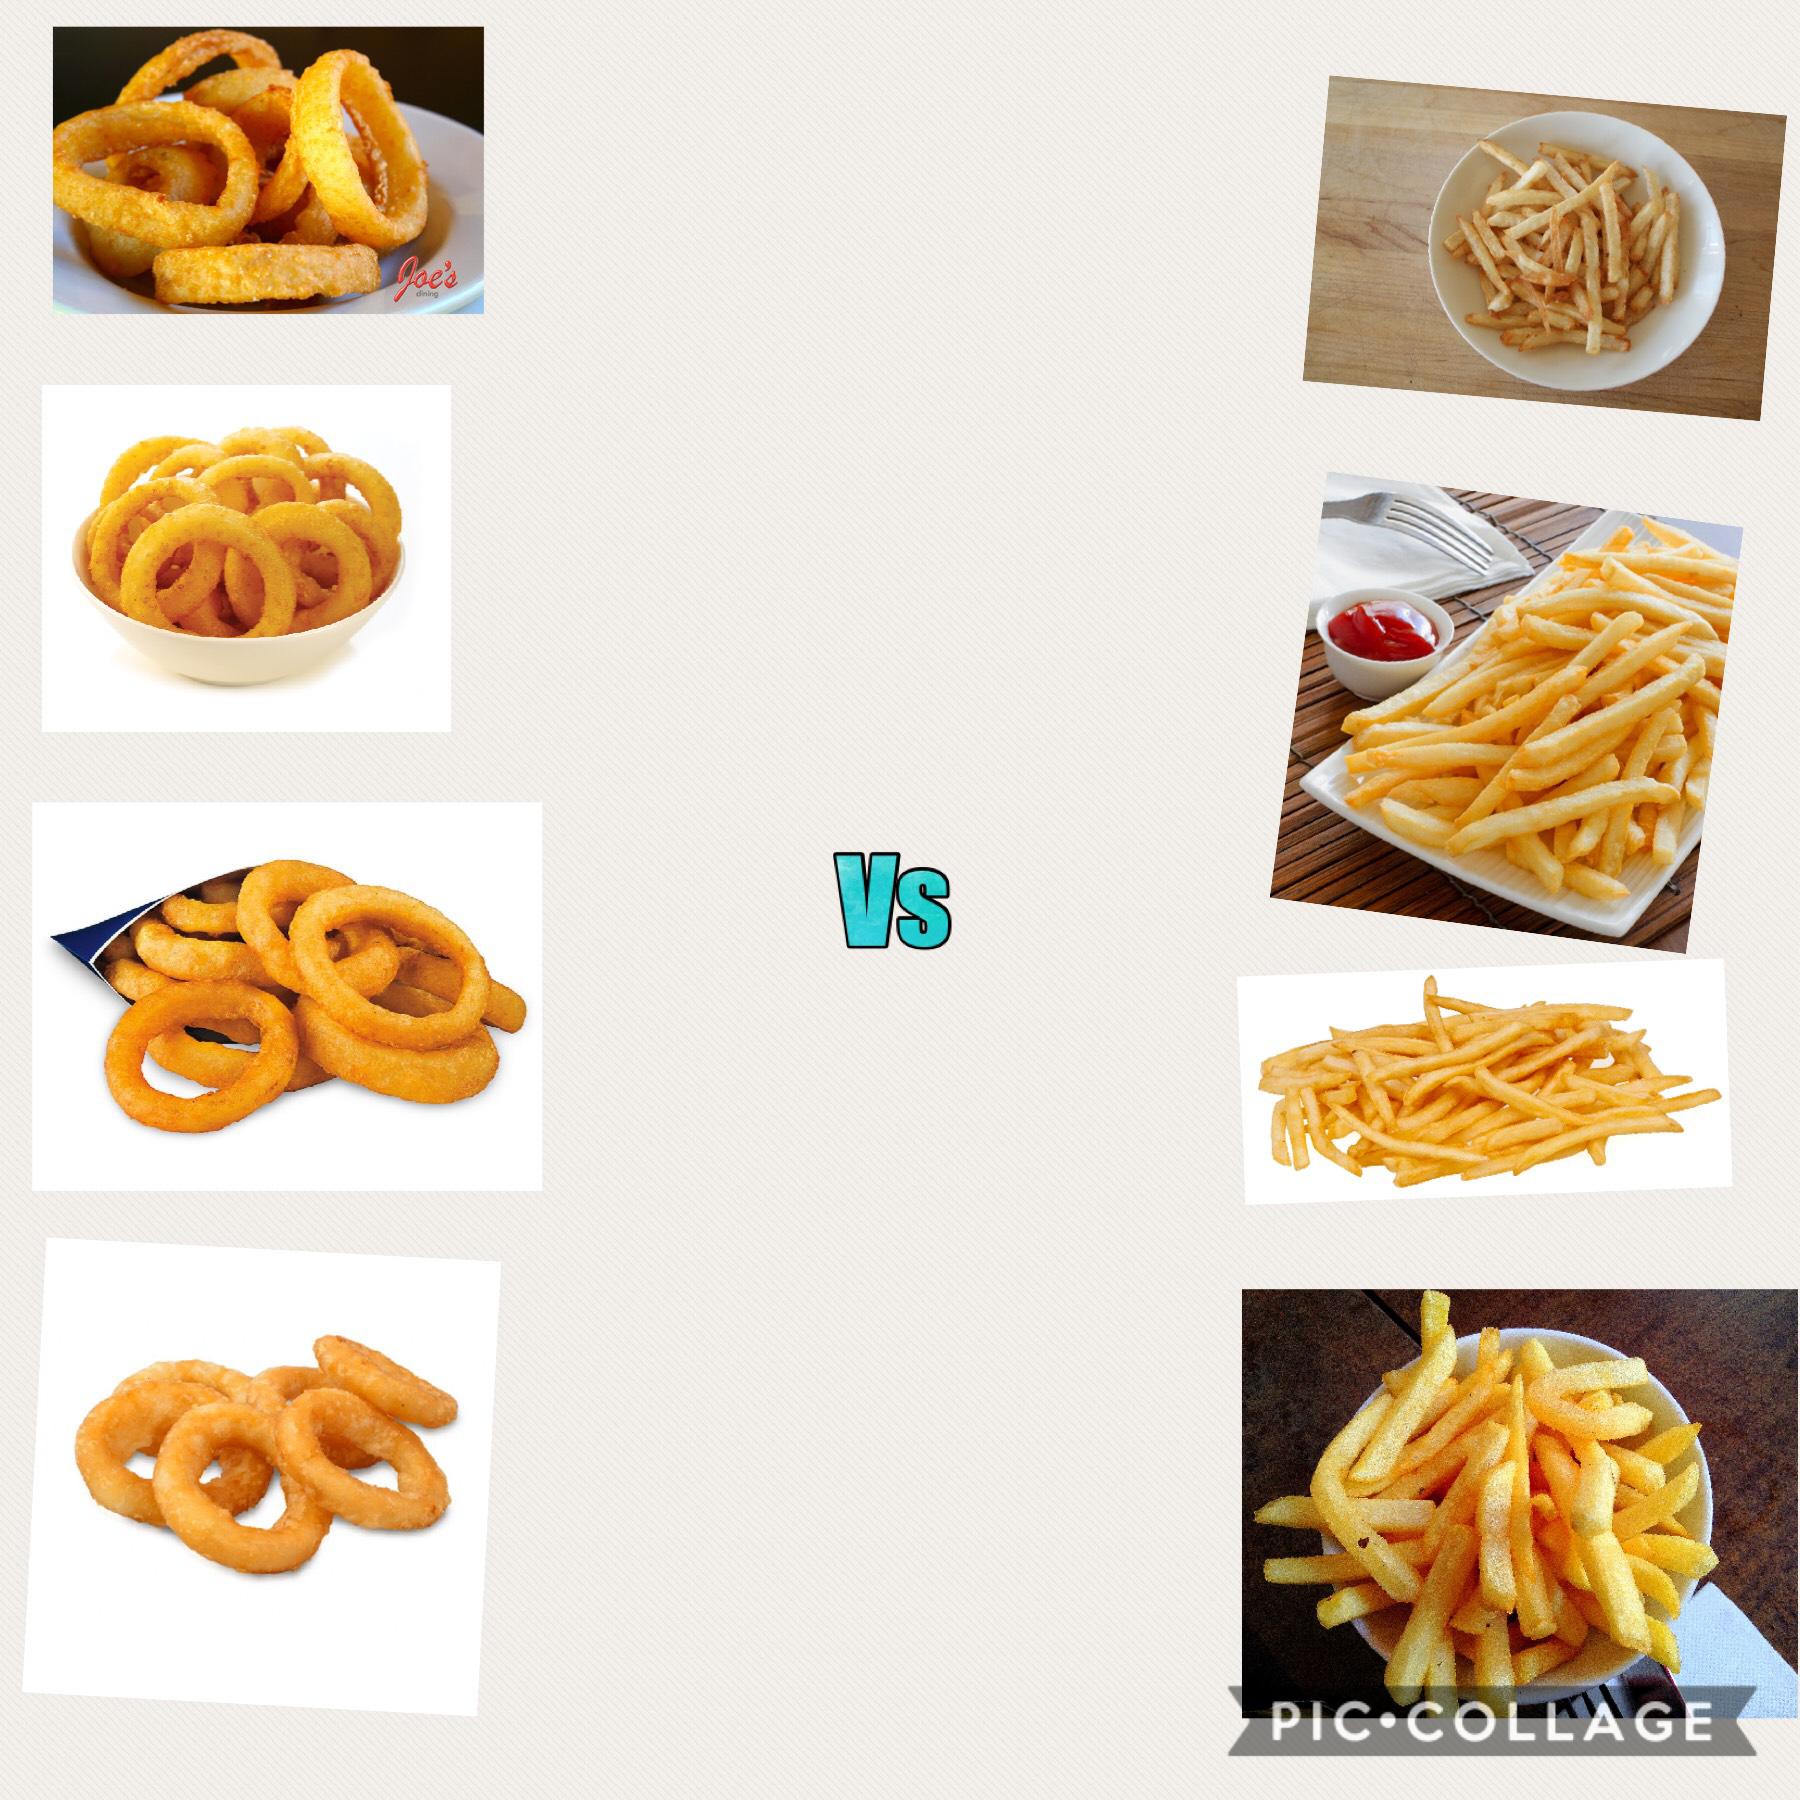 ONION RINGS VS FRENCH FRIES